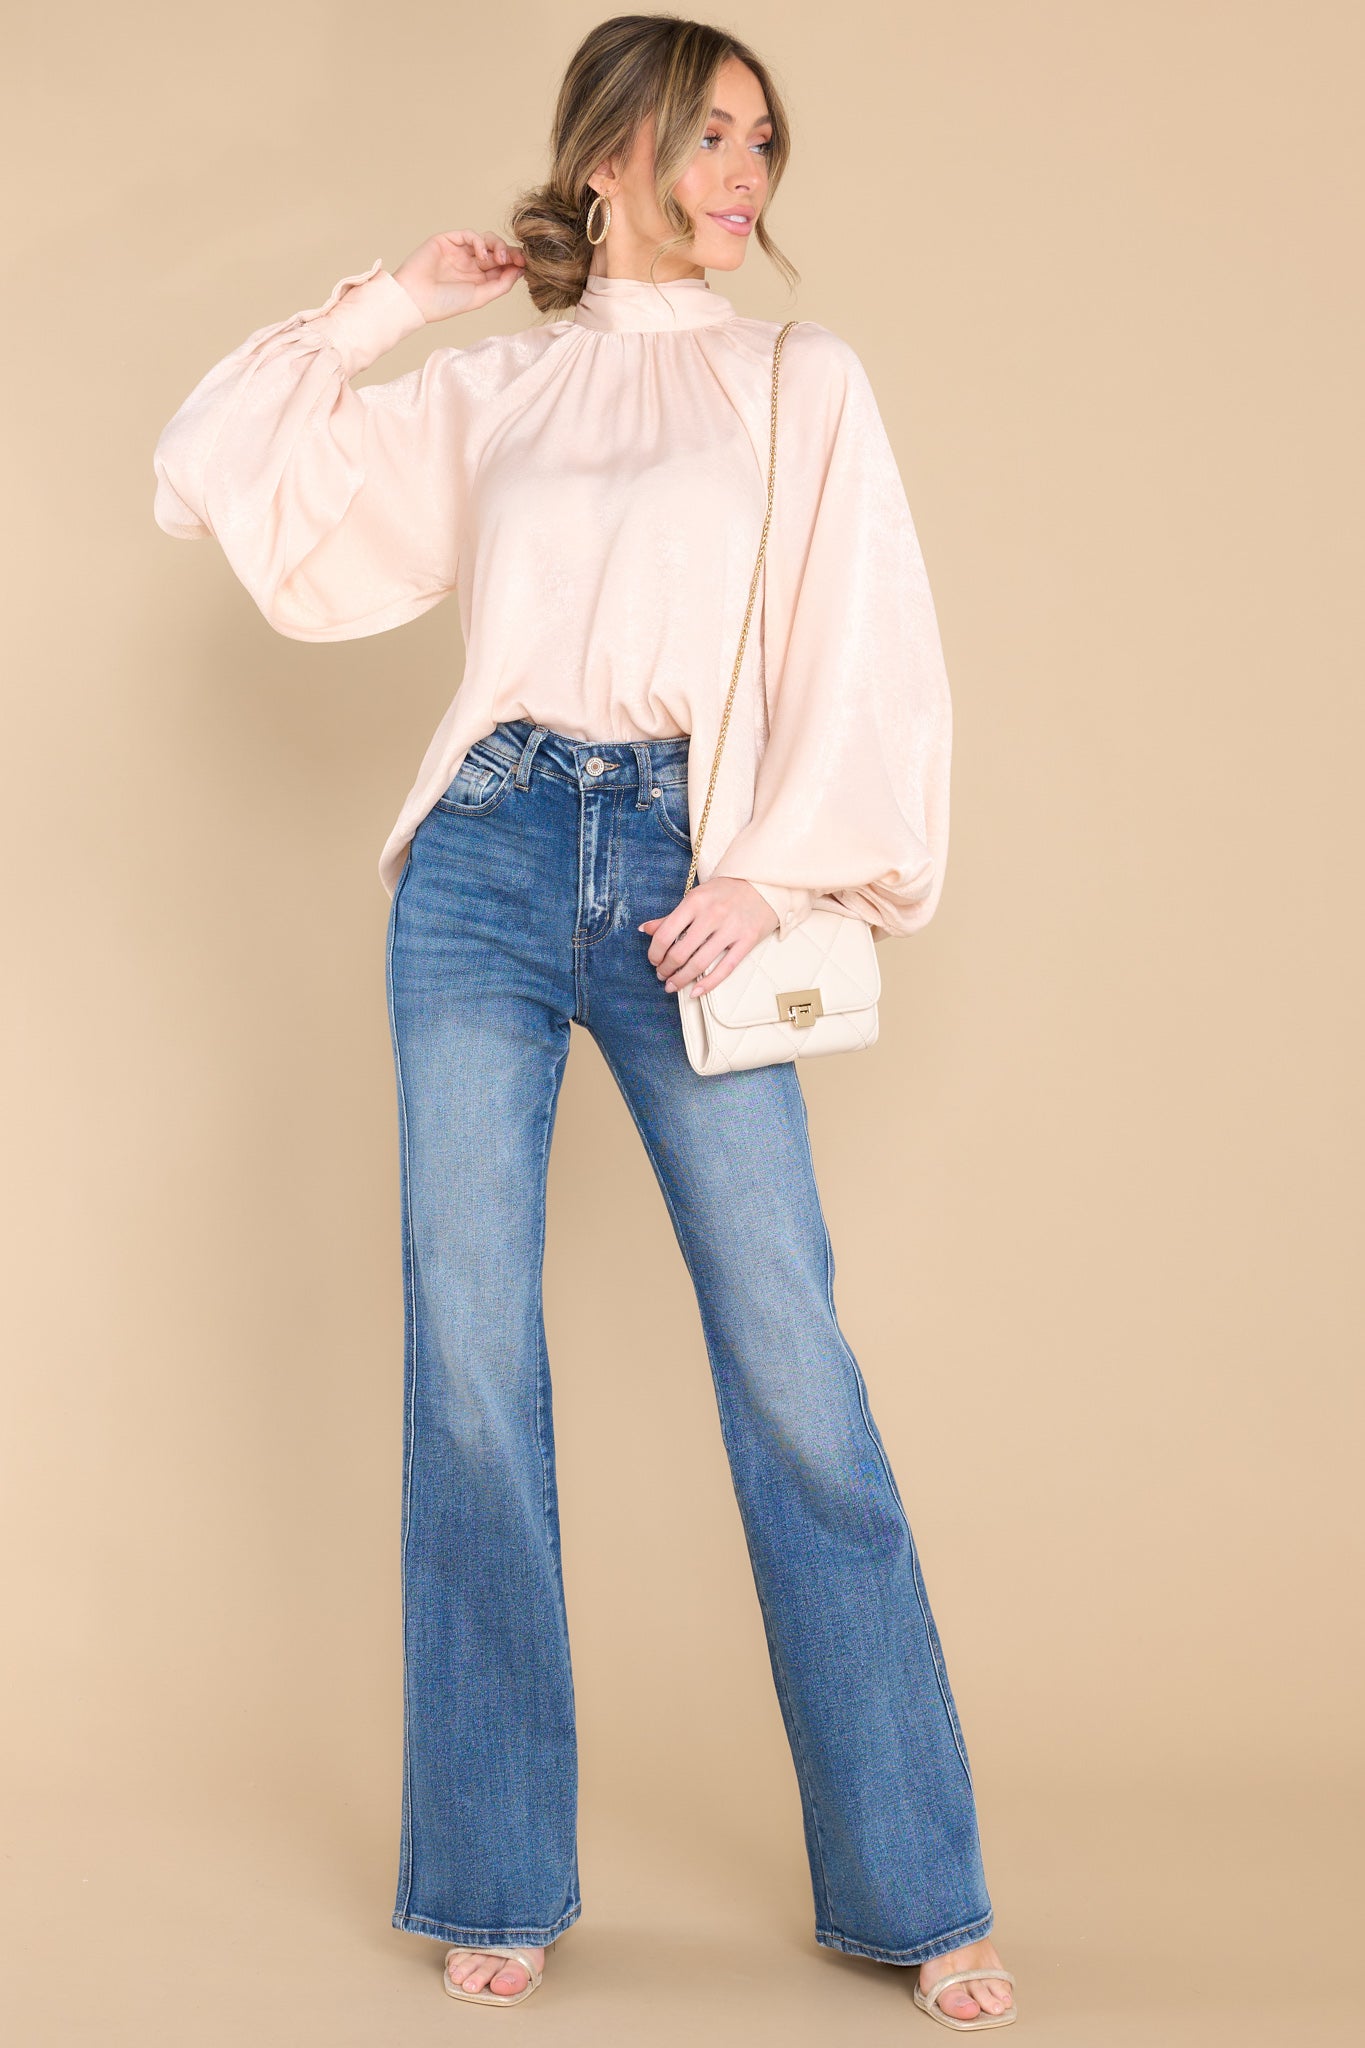 Waiting For The Sun Bells - ultimate high waisted flares and retro tee!  Love this look!